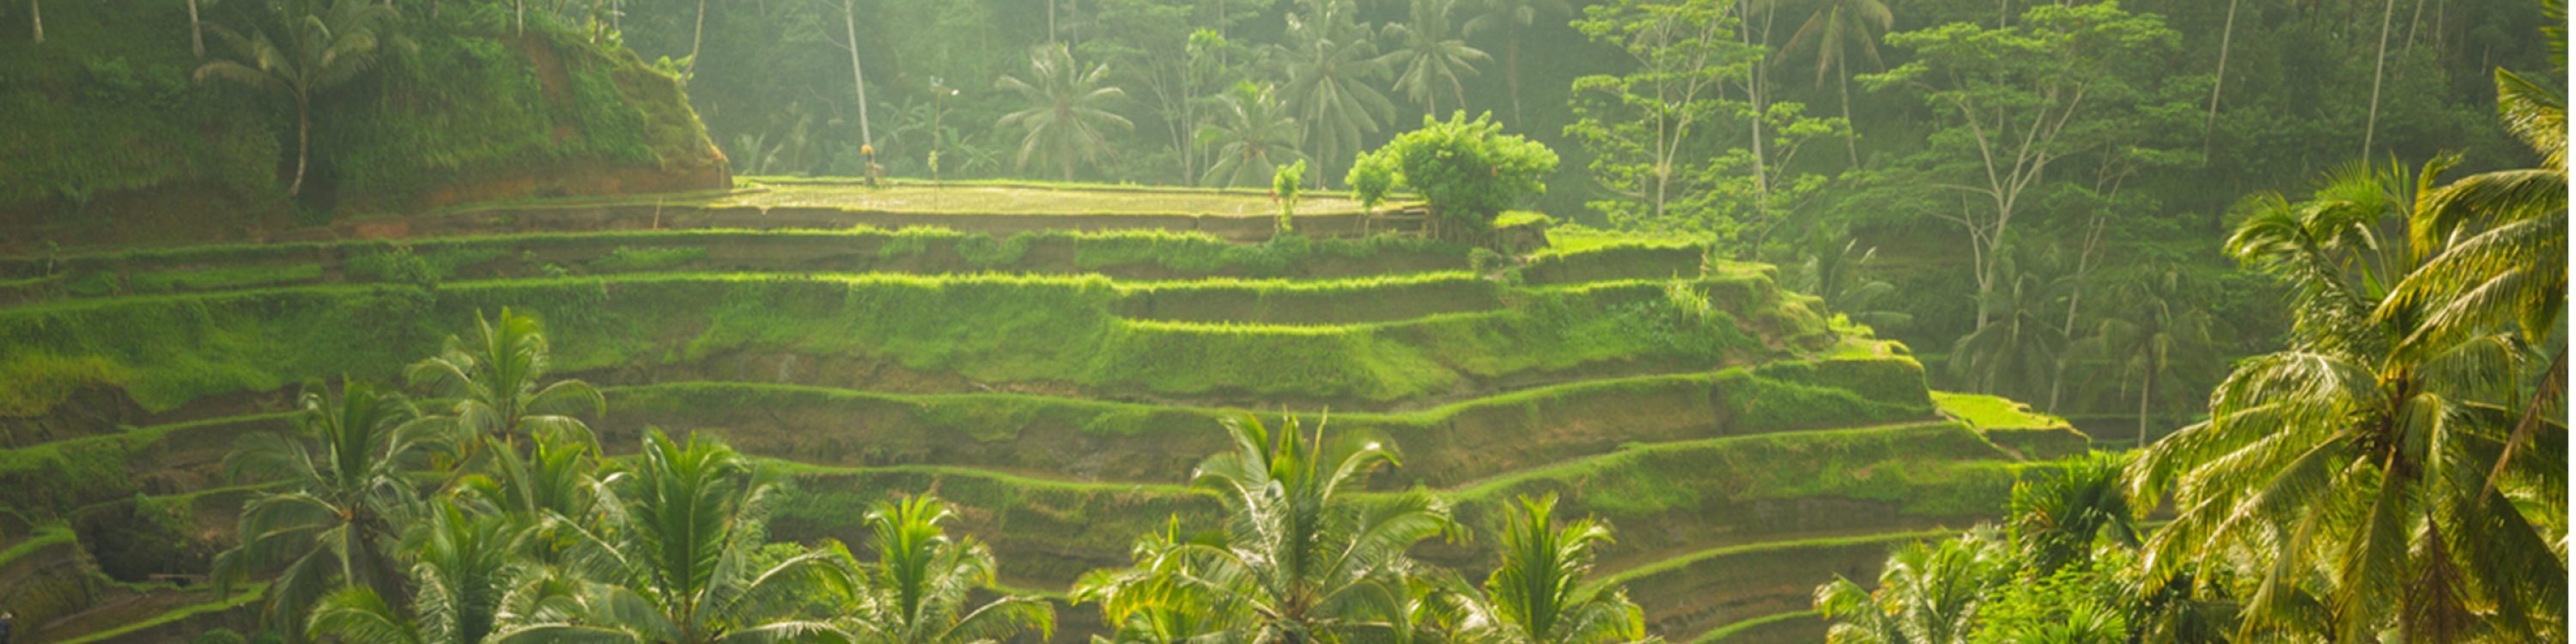 Beautiful rice terraces in the moring light near Tegallalang village, Ubud, Bali, Indonesia.